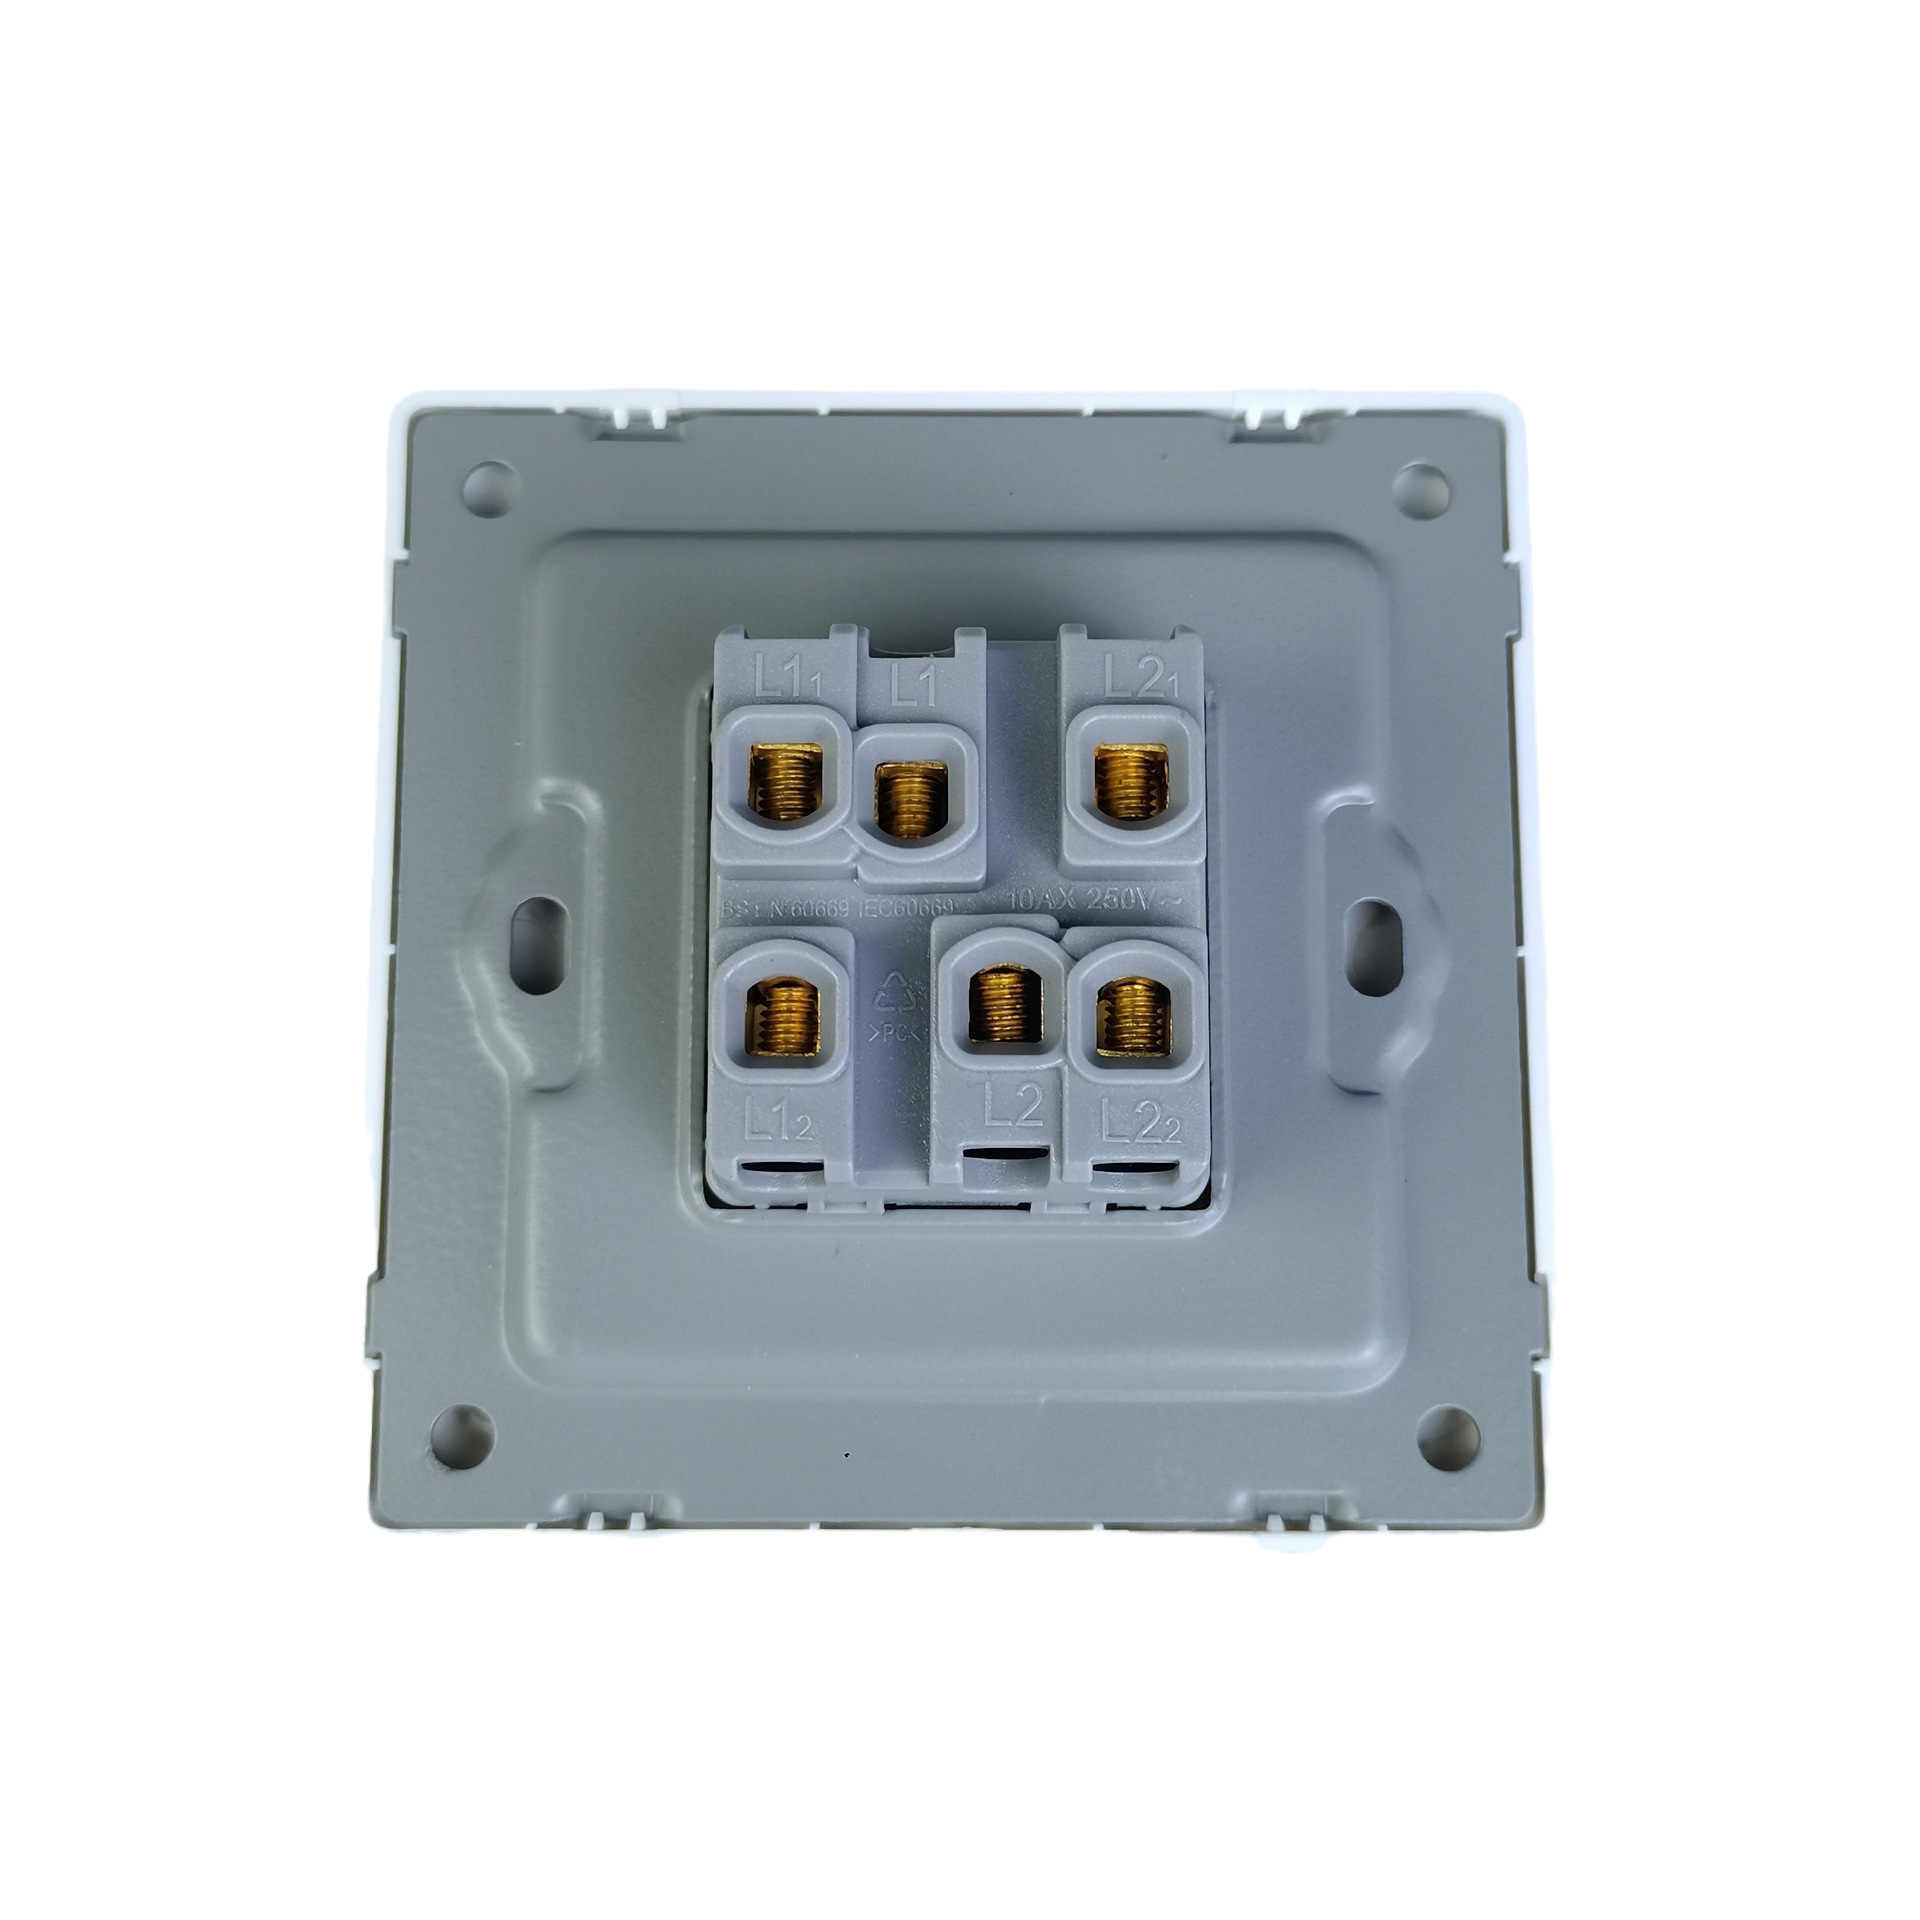 Uk Standard Household Power Wall Mounted Luxury Smart Wall Switches And Socket